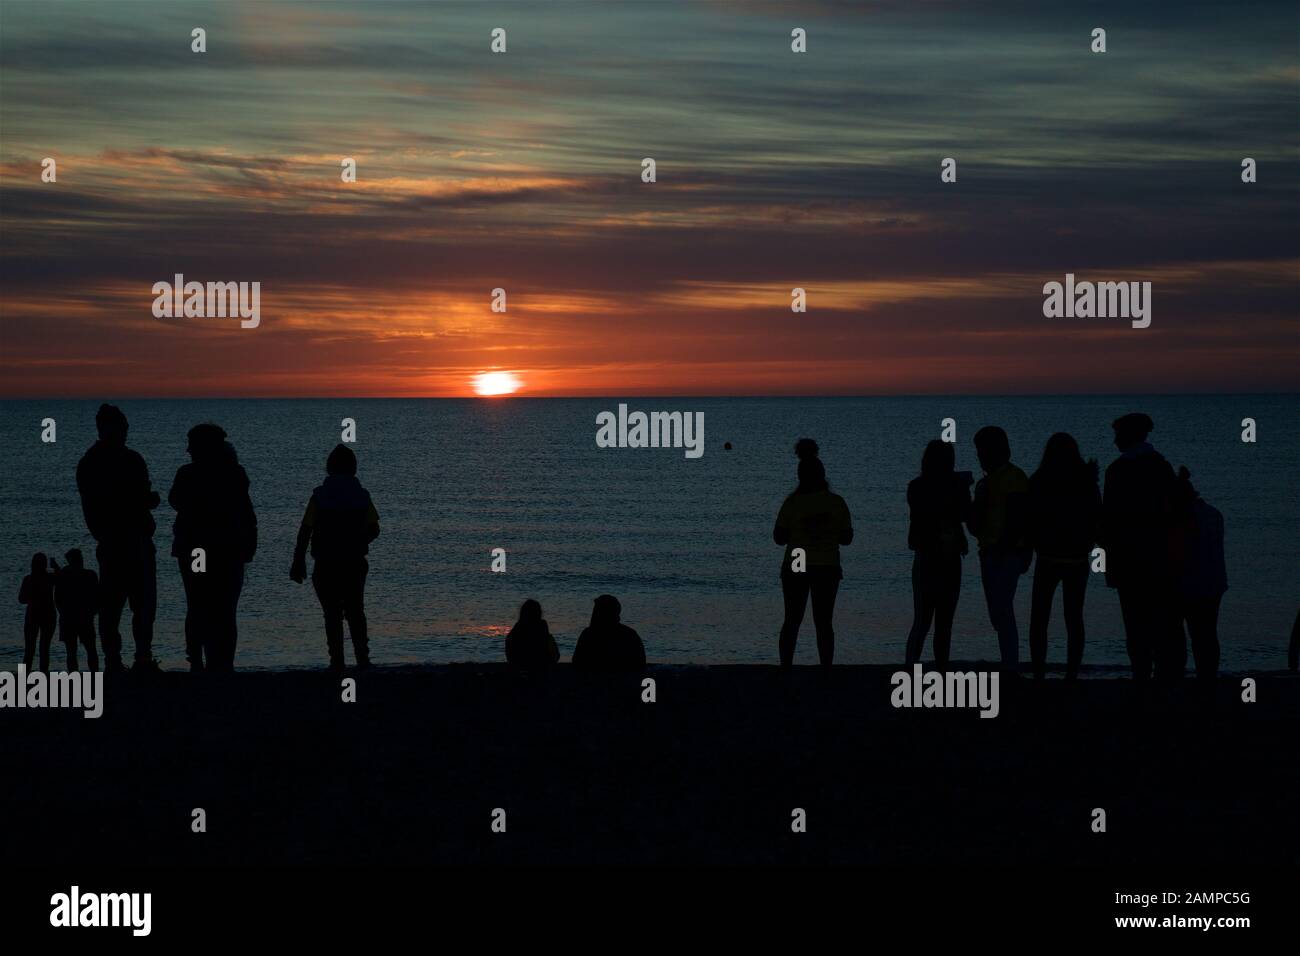 A group of people in silhouette on a beach in County Wicklow at sunset on the east coast of Ireland. Stock Photo